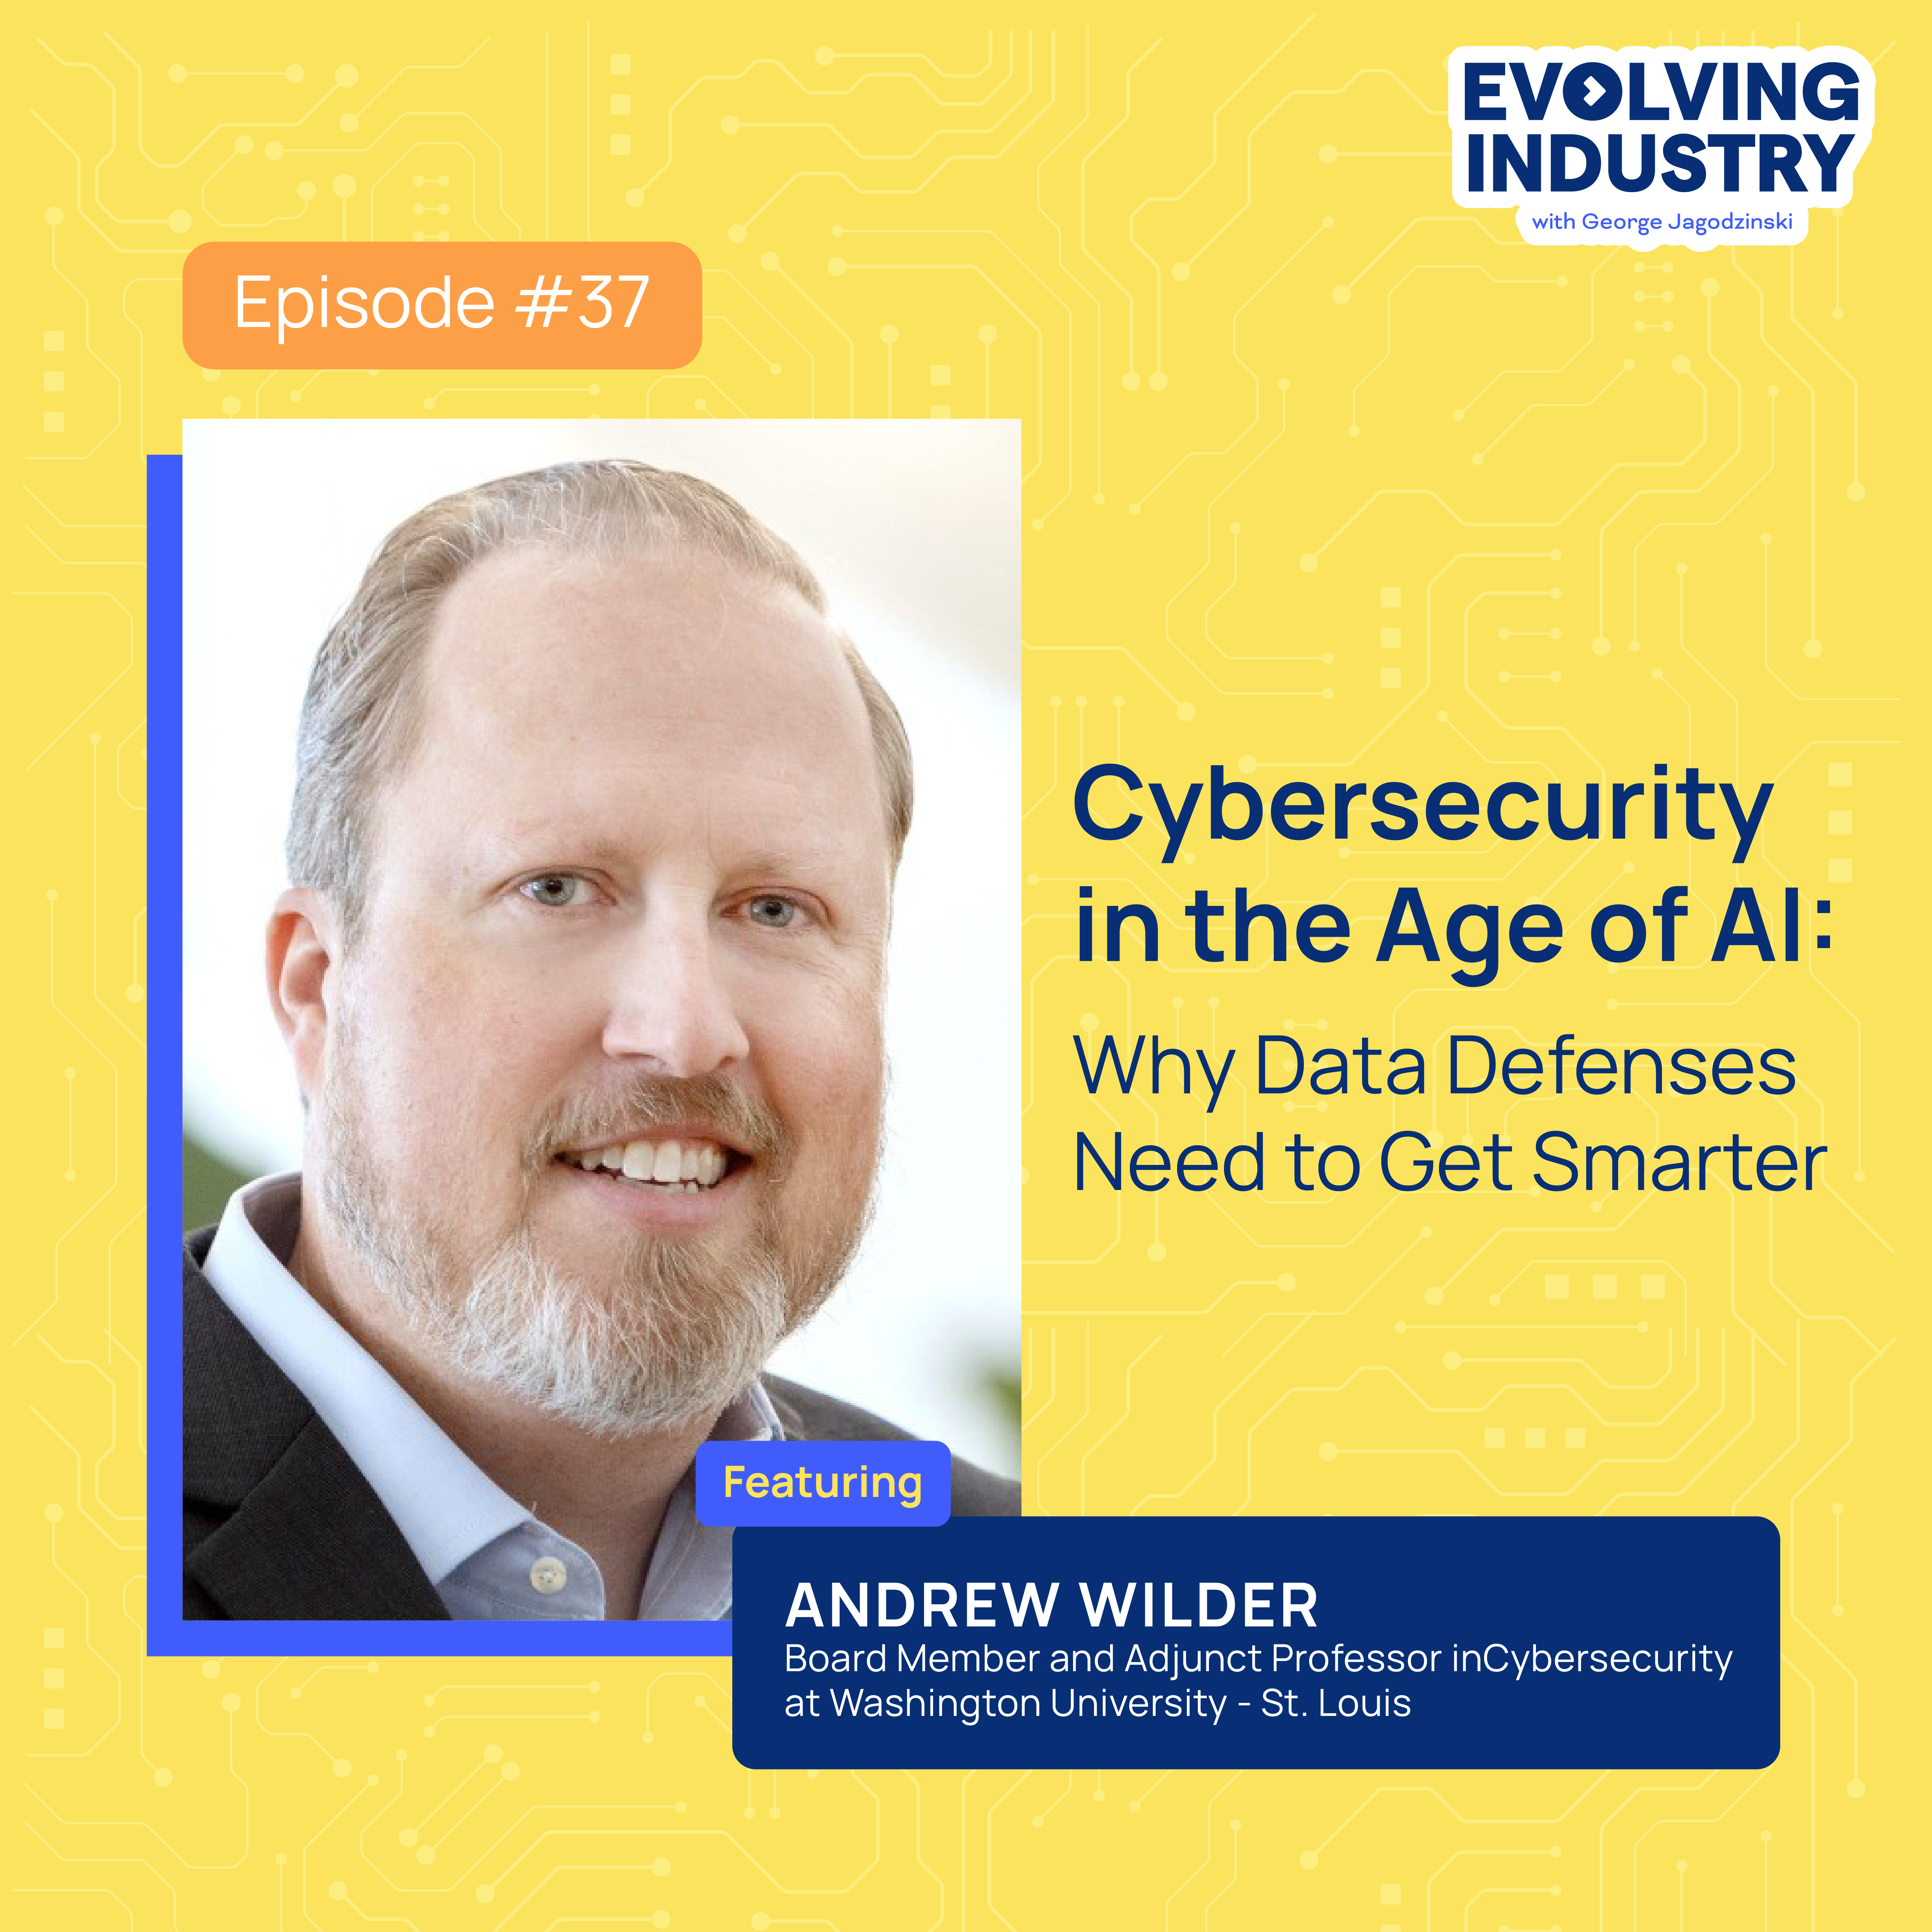 Cybersecurity in the Age of AI: Why Data Defenses Need to Get Smarter